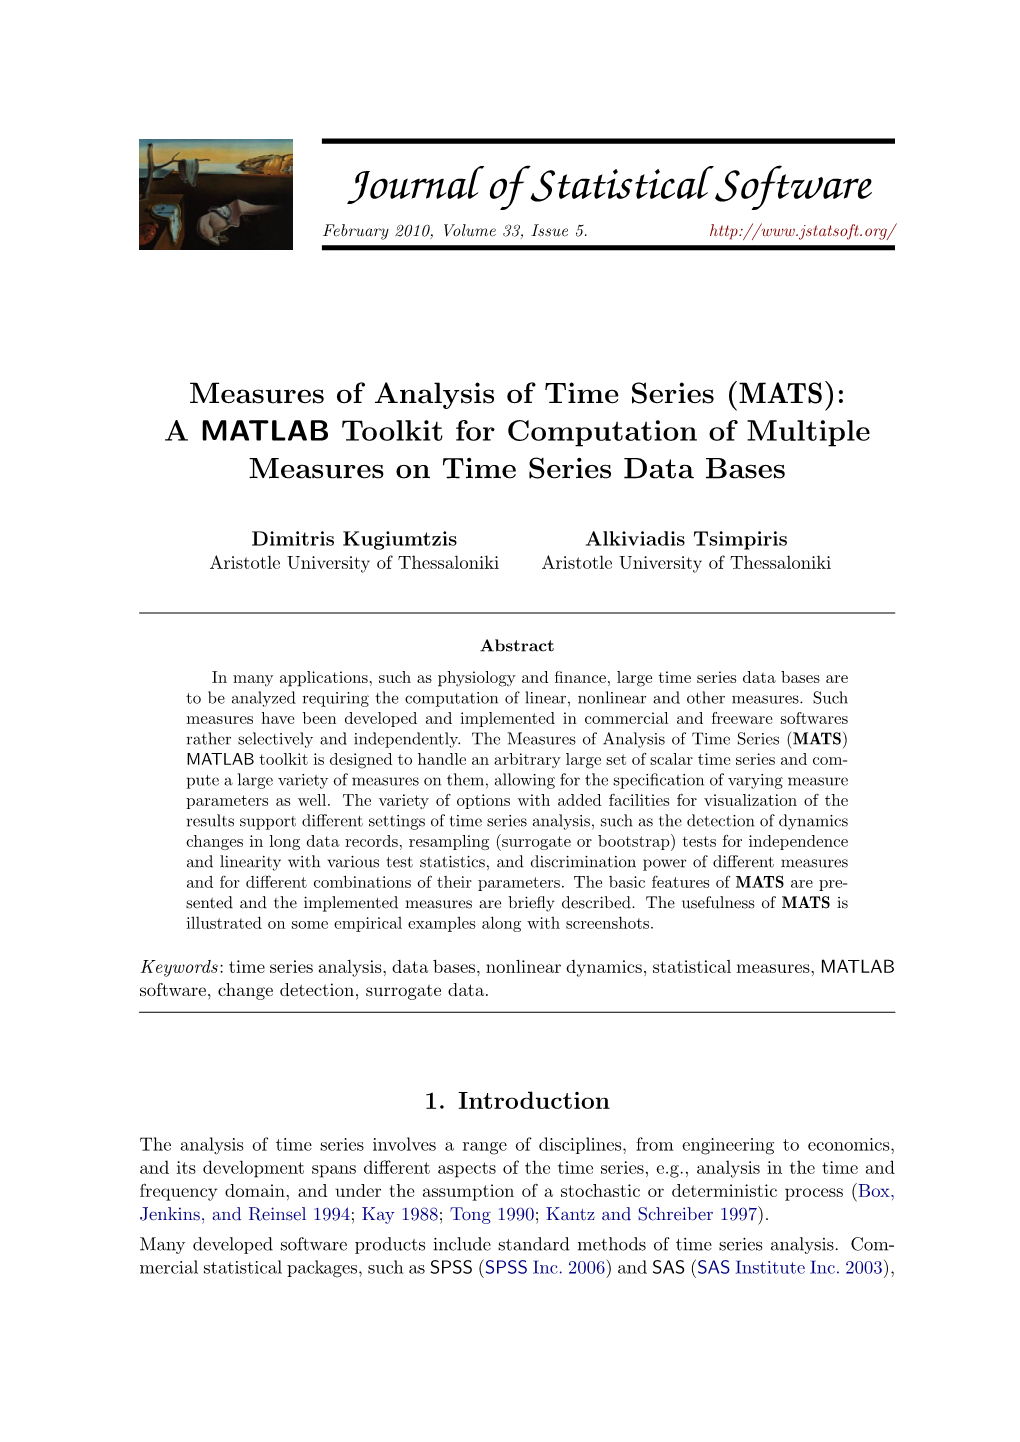 Measures of Analysis of Time Series (MATS): a MATLAB Toolkit for Computation of Multiple Measures on Time Series Data Bases